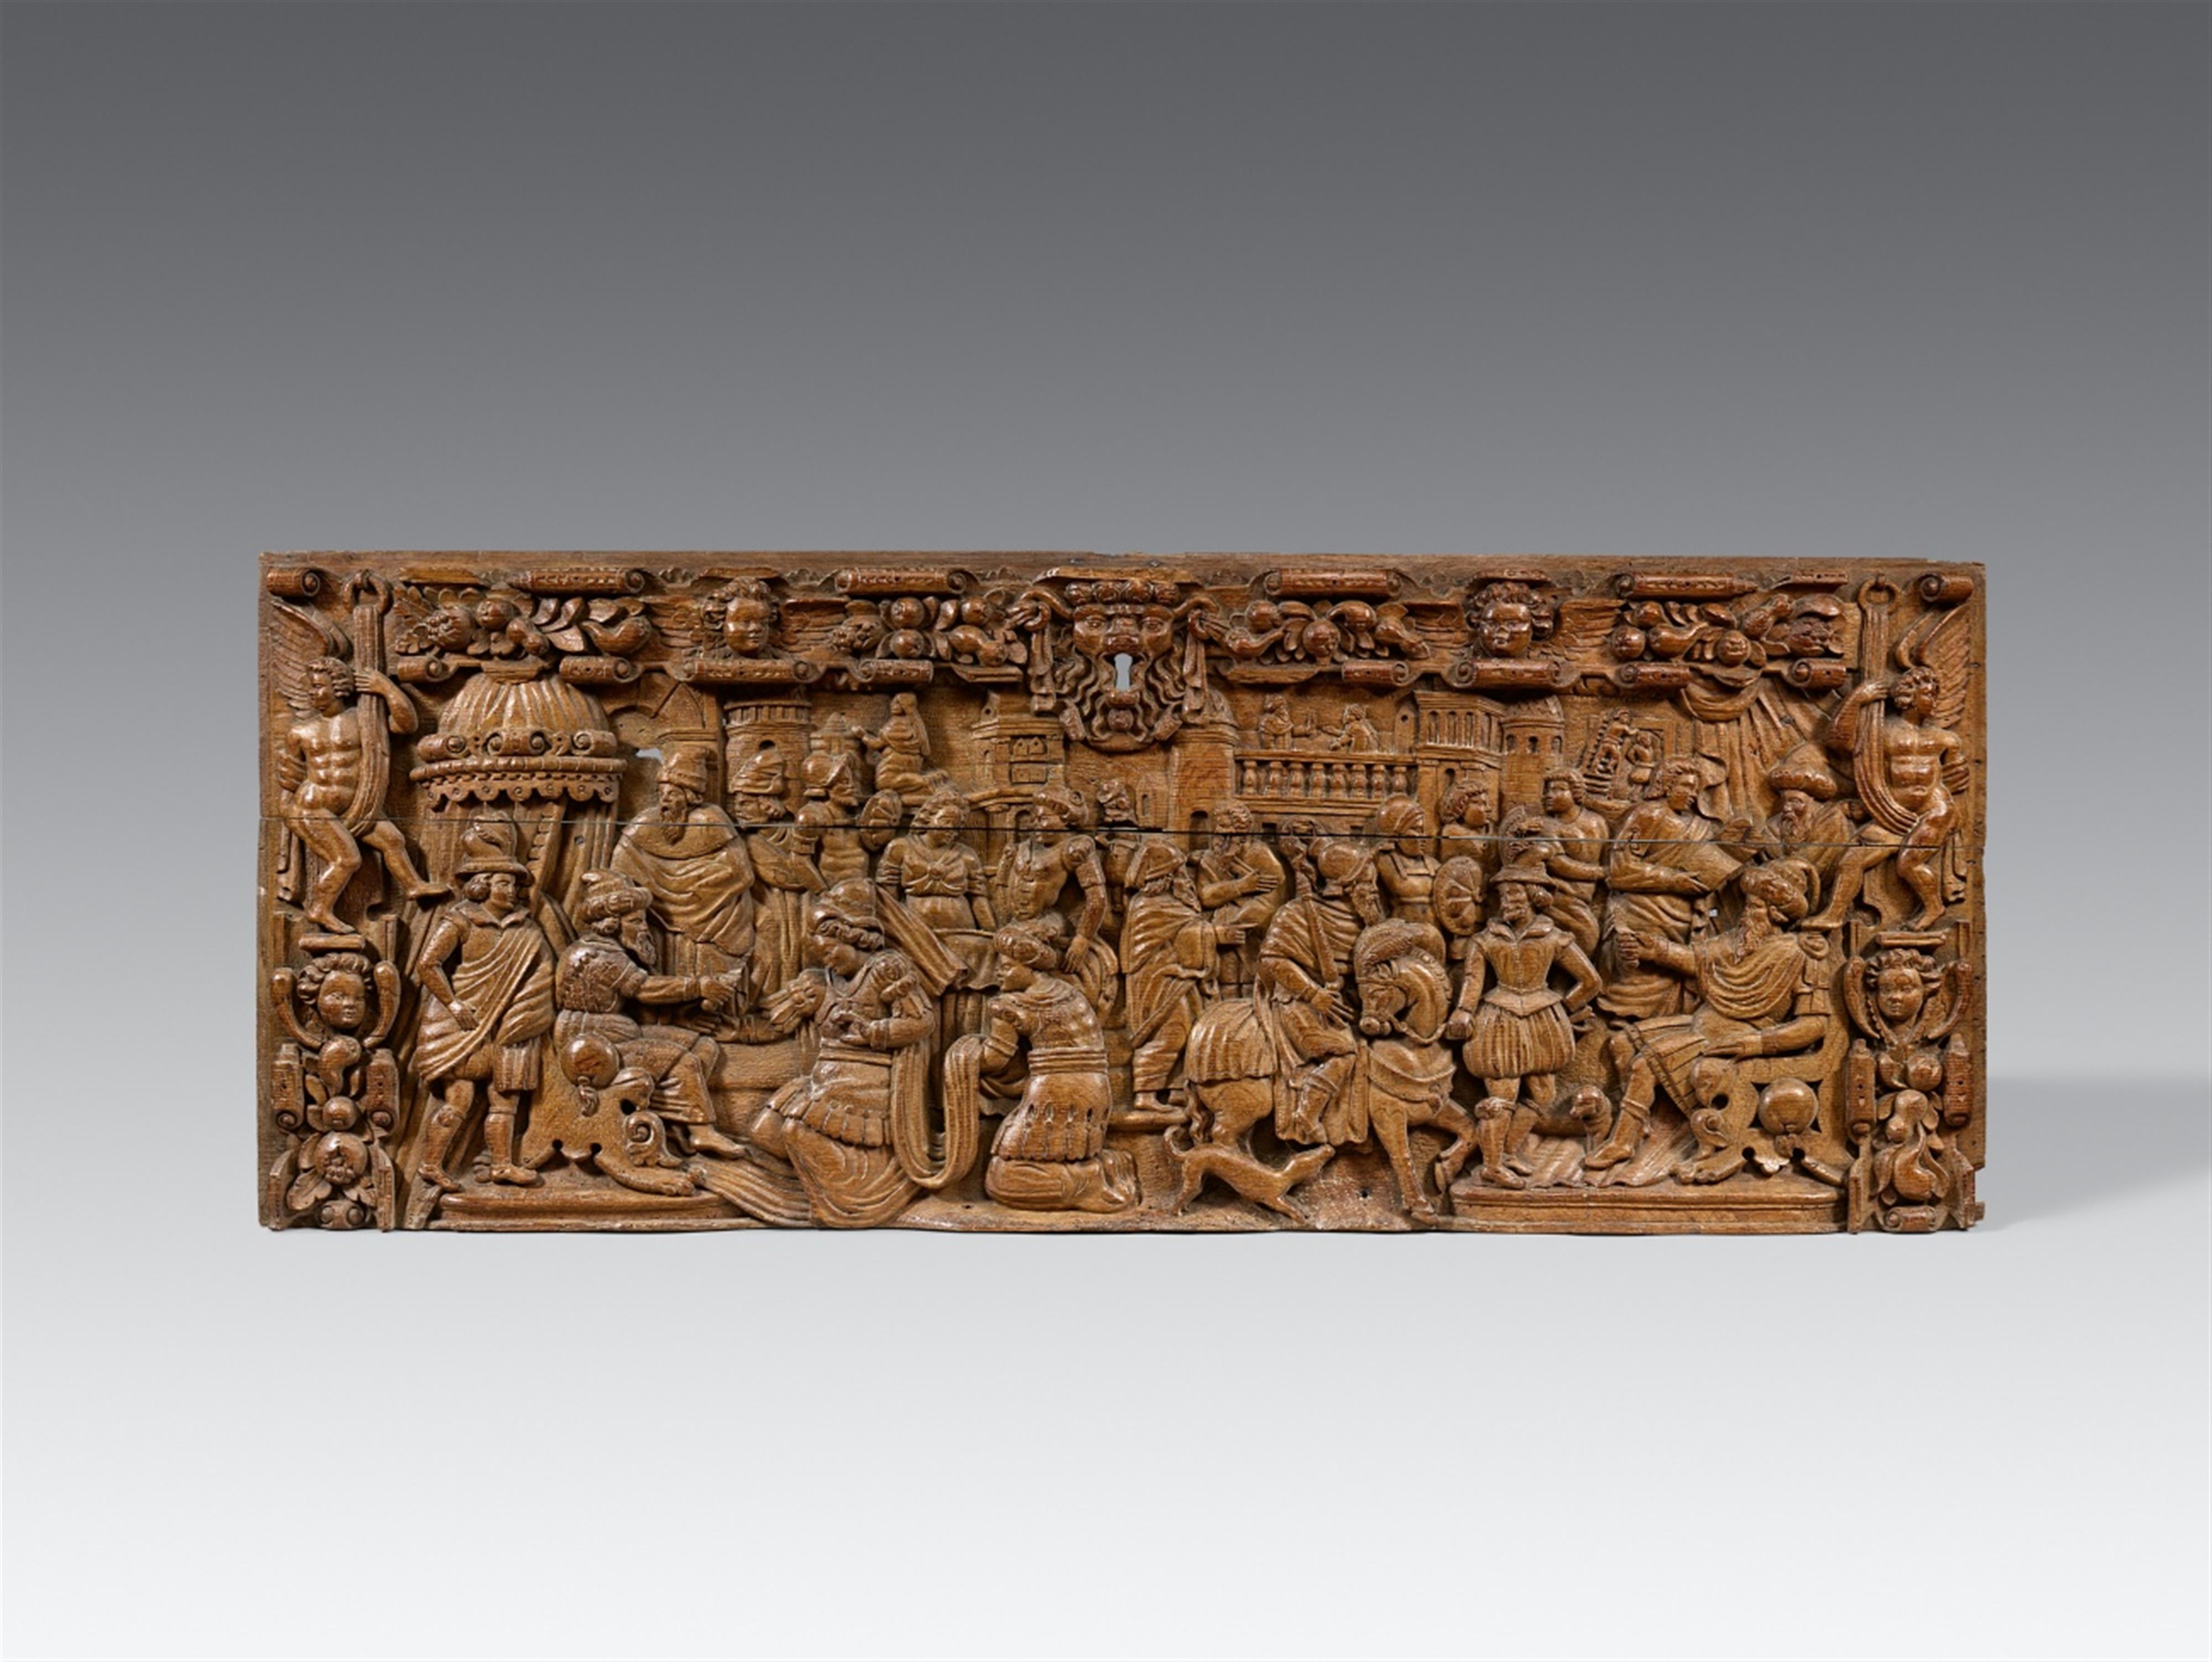 Netherlands around 1600 - A Netherlandish carved wooden relief with scenes from the Old Testament, around 1600 - image-1